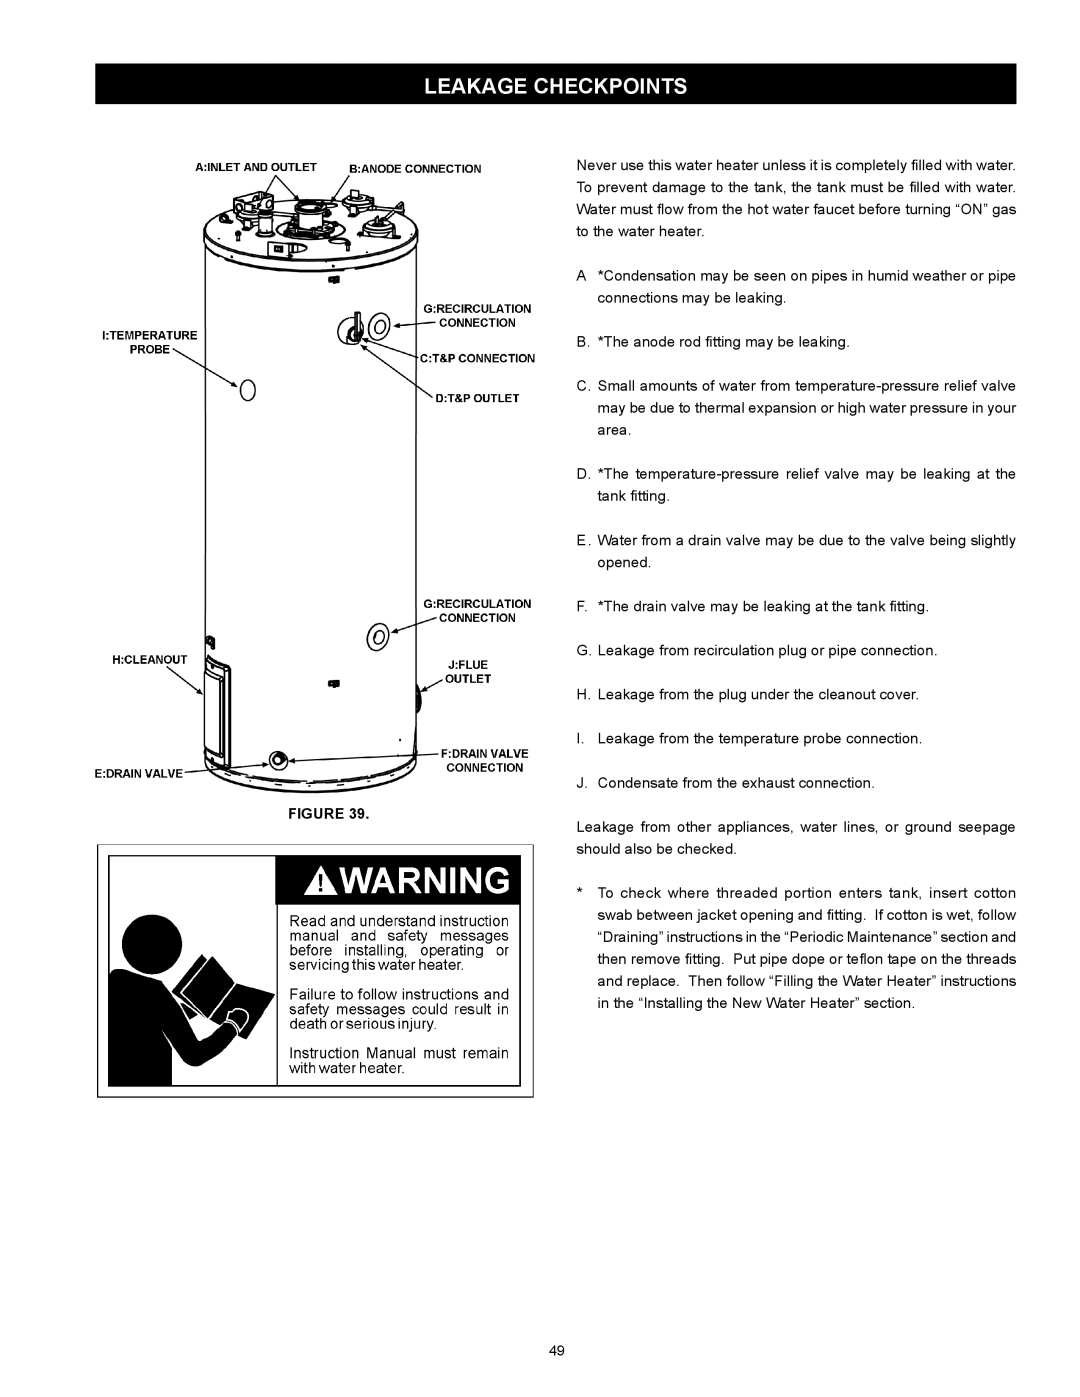 American Water Heater VG6250T100 instruction manual leakage checkpoints 